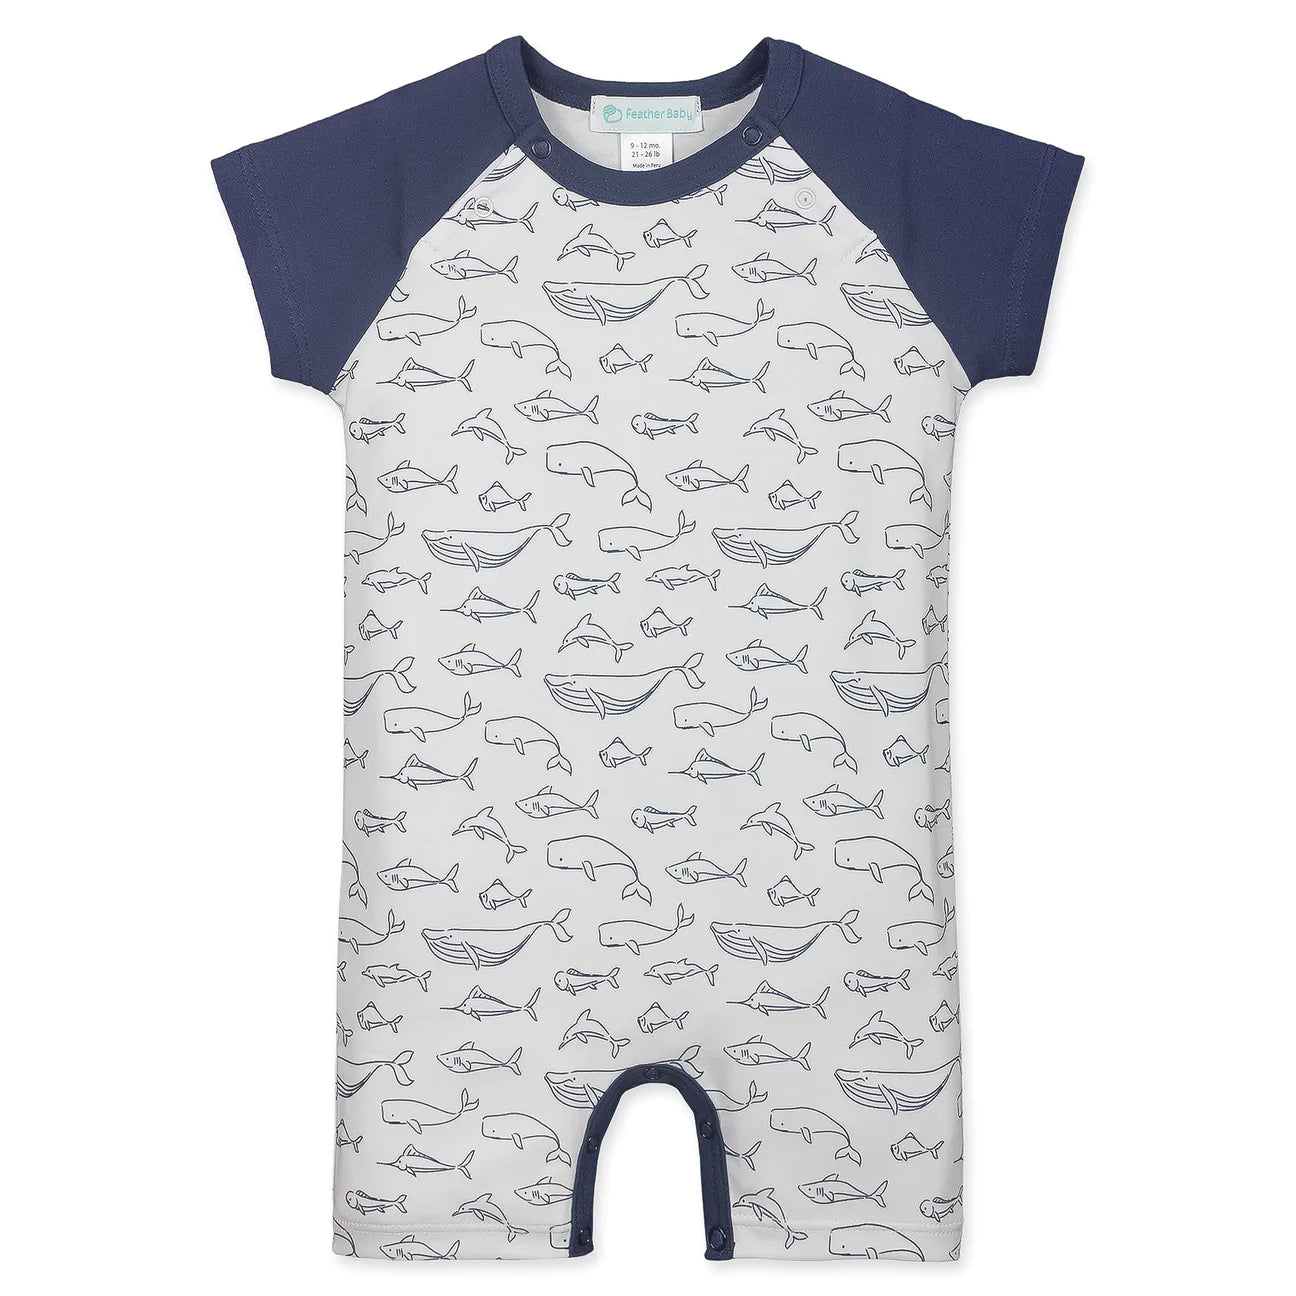 Feather Baby Sailor Romper - Big Fish & Whales on White